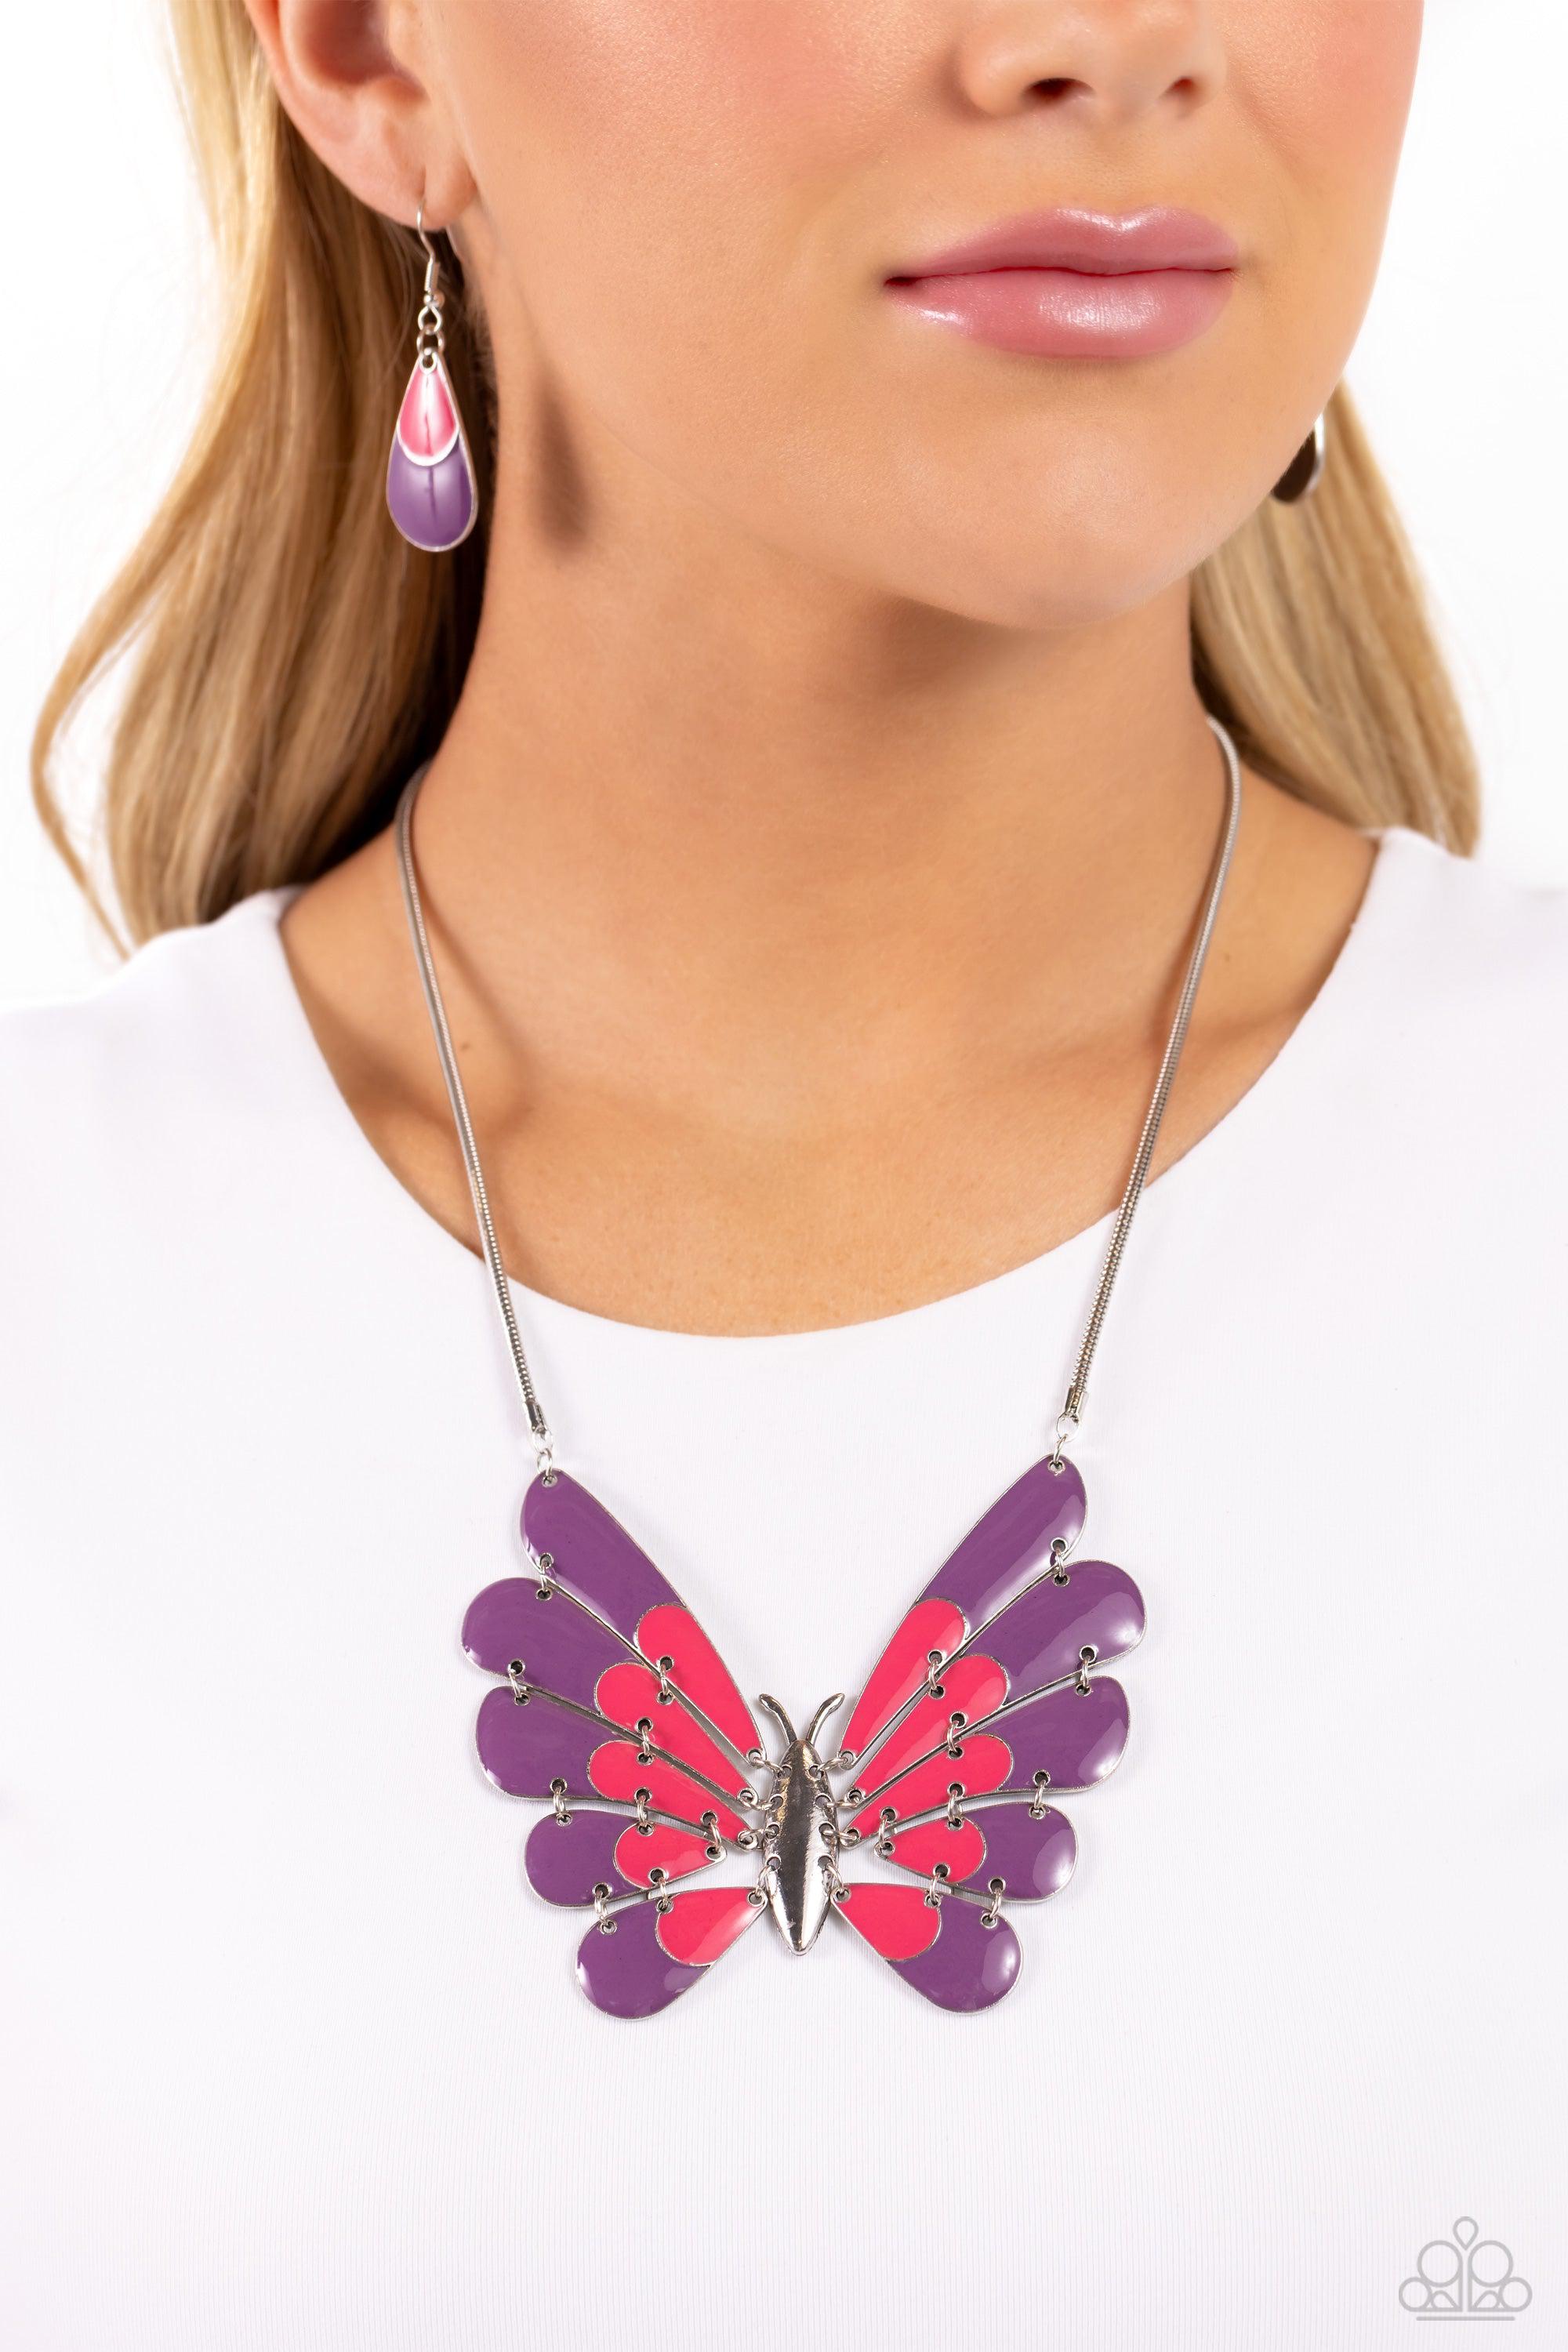 Moth Maven Purple & Pink Necklace - Paparazzi Accessories- lightbox - CarasShop.com - $5 Jewelry by Cara Jewels